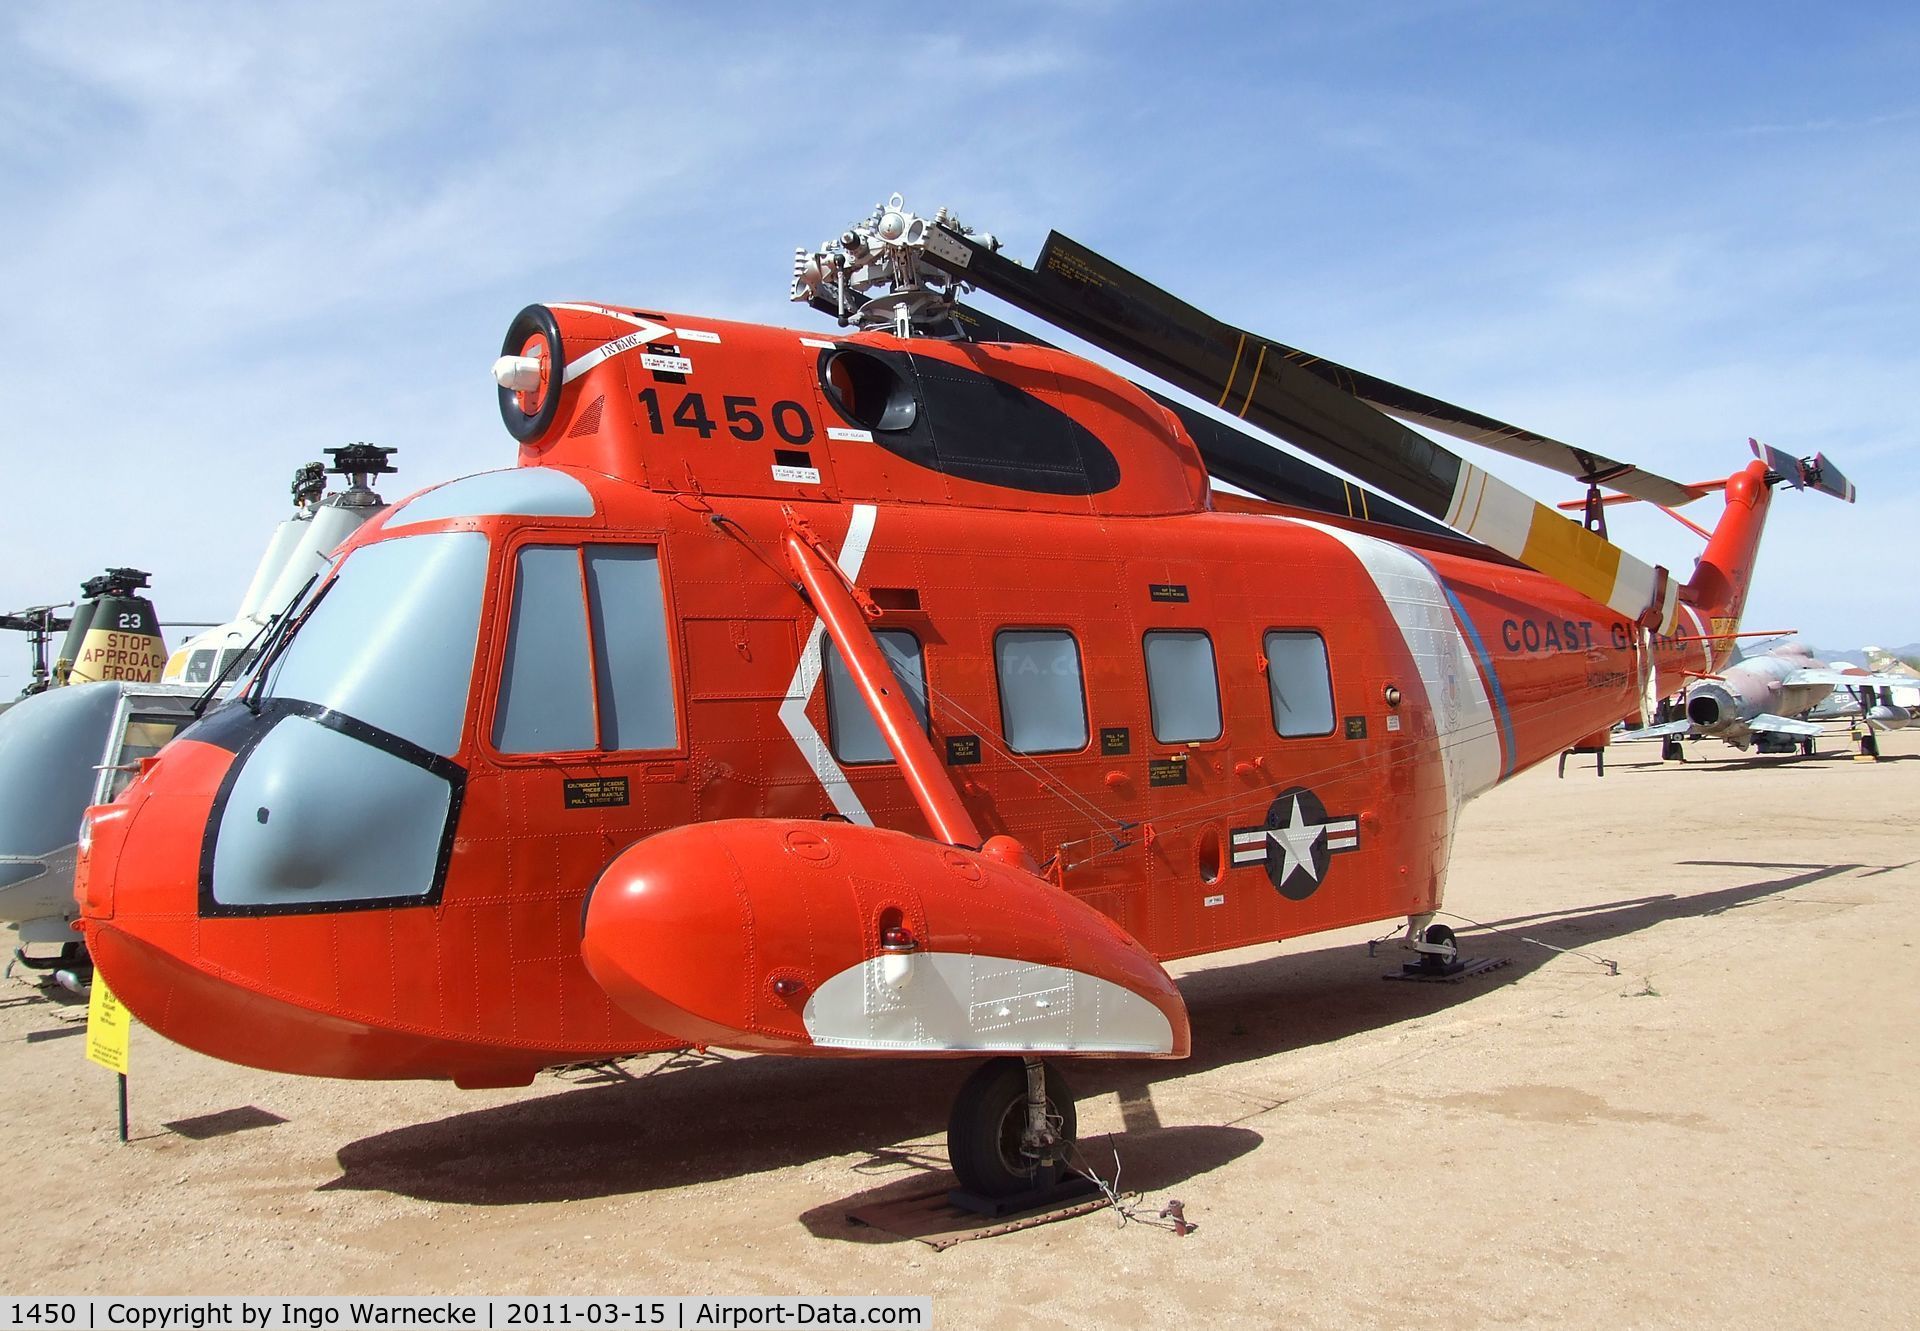 1450, Sikorsky HH-52A Sea Guard C/N 62.133, Sikorsky HH-52A Sea Guardian at the Pima Air & Space Museum, Tucson AZ